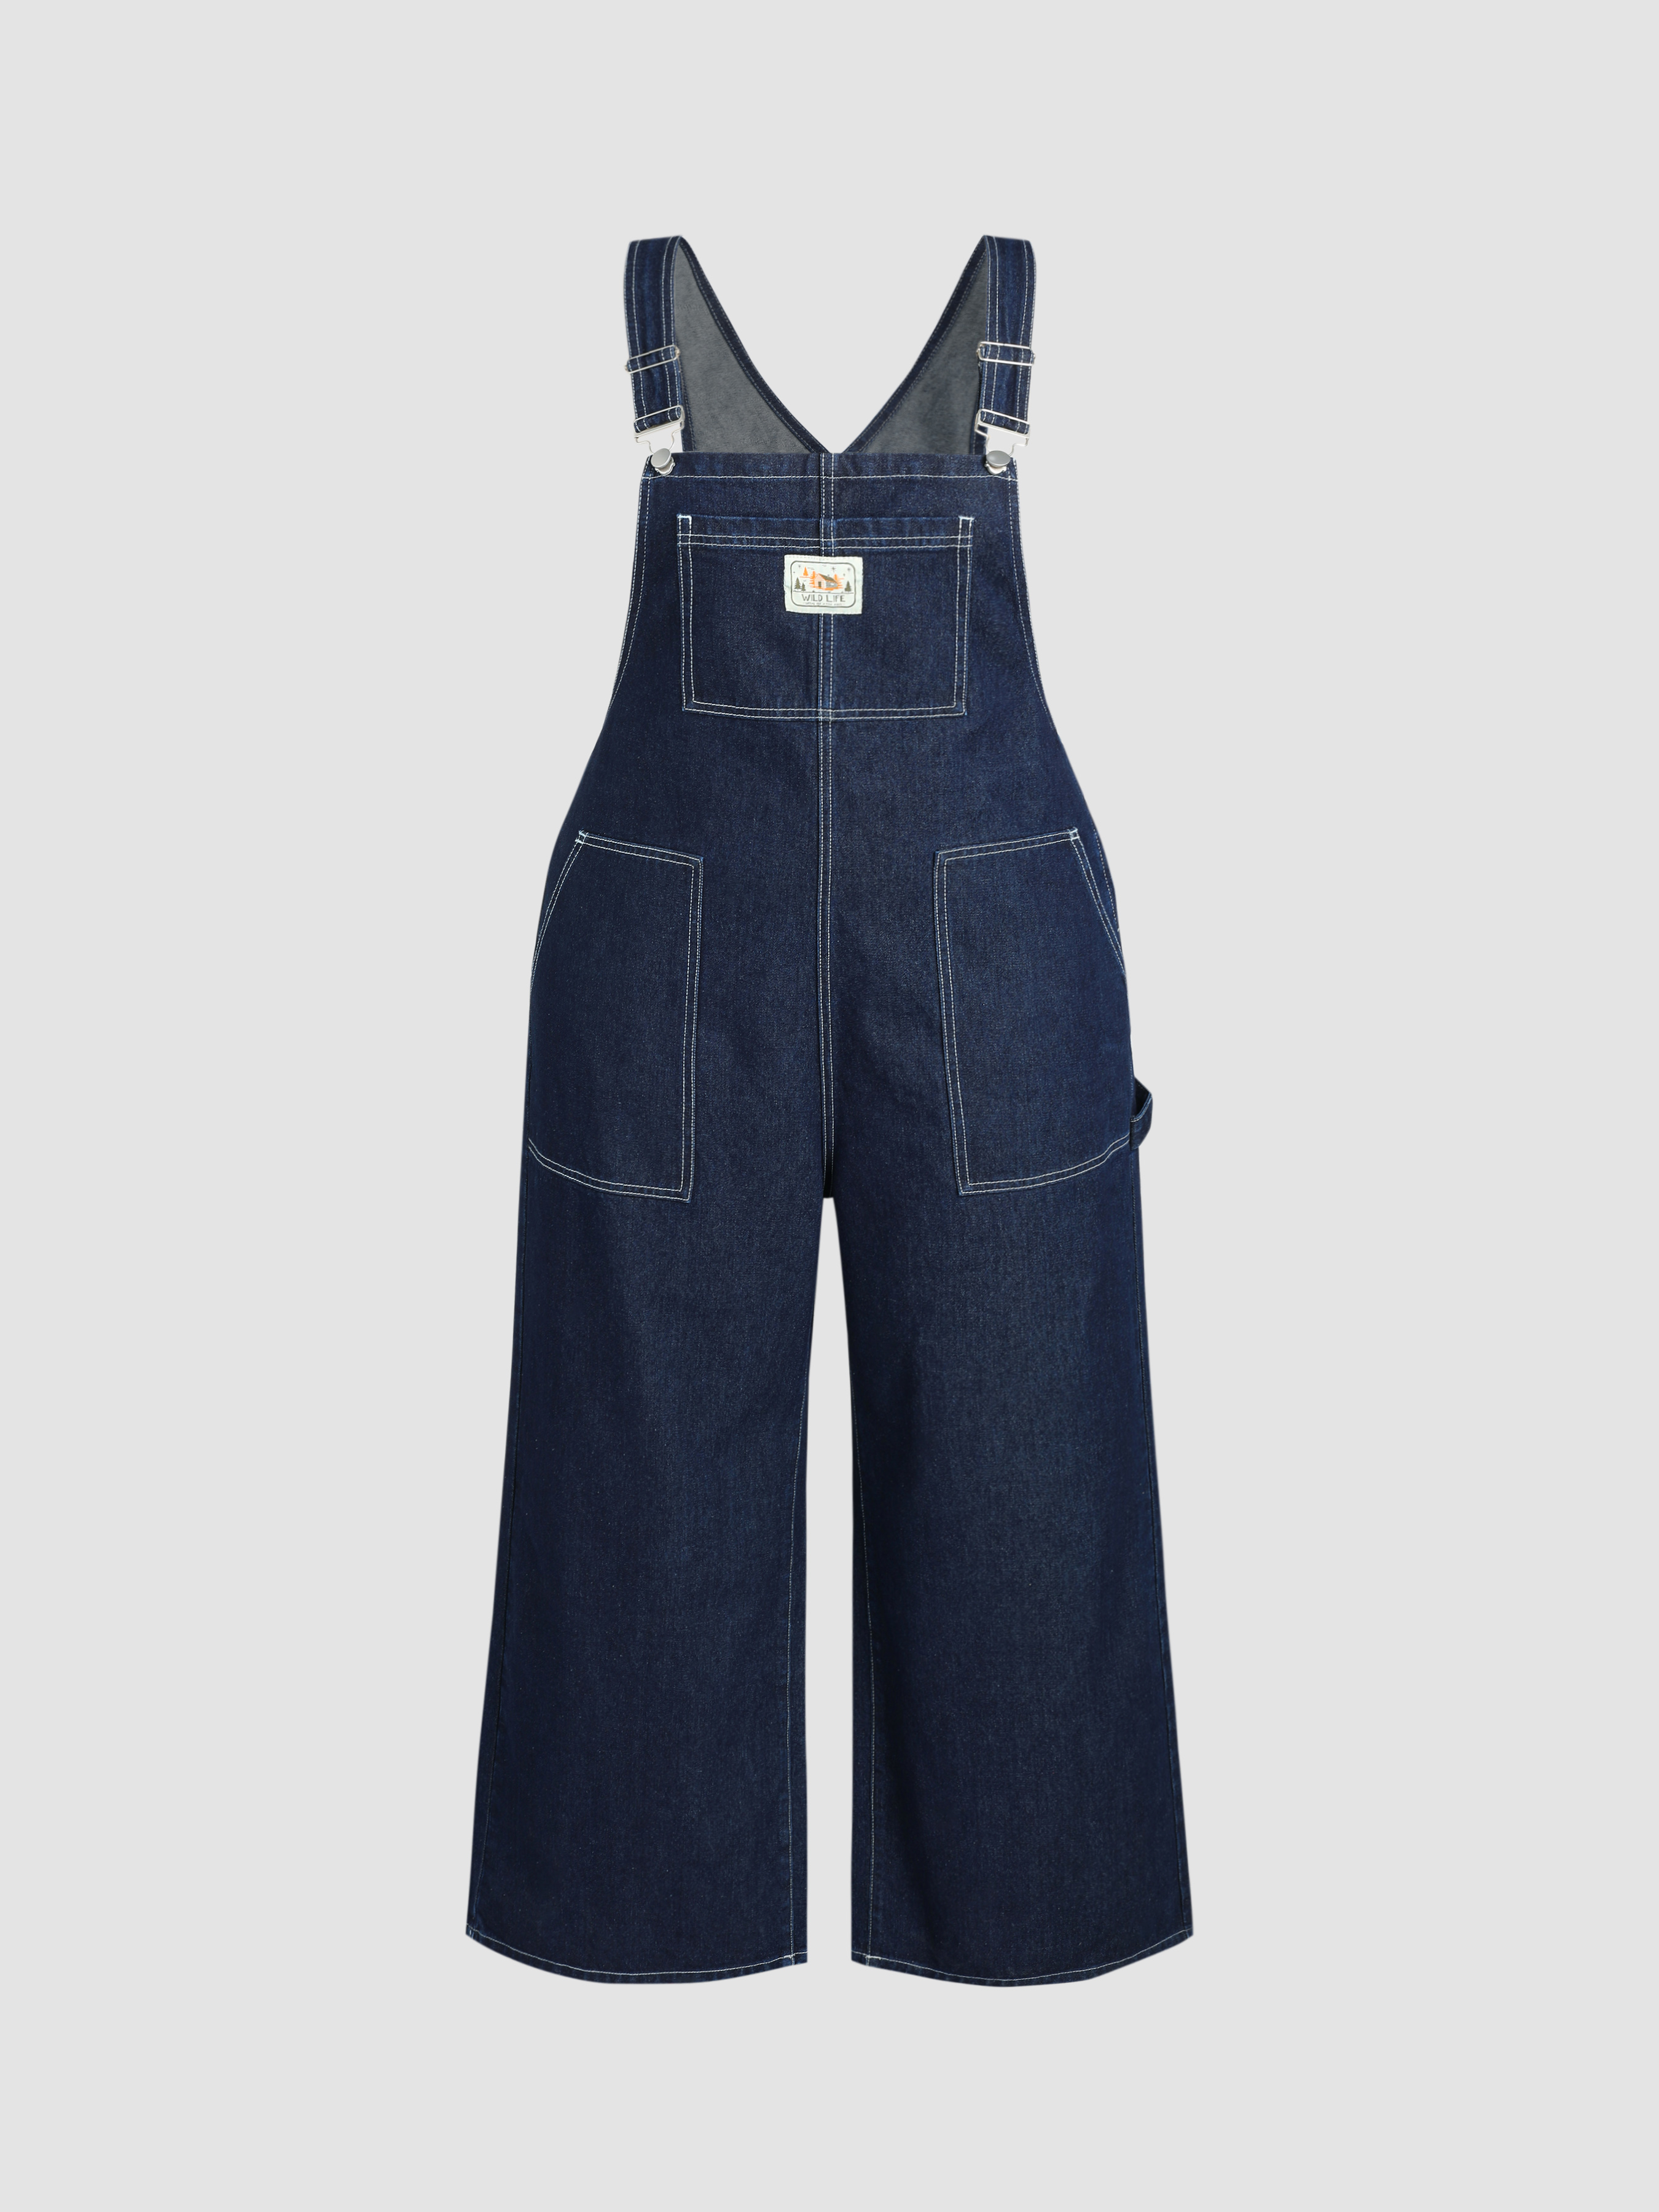 Amazon.com: A2Z 4 Kids Girls Denim Dungaree Pinafore Jumpsuit - Dungaree  D83 Dark Blue 5-6: Clothing, Shoes & Jewelry